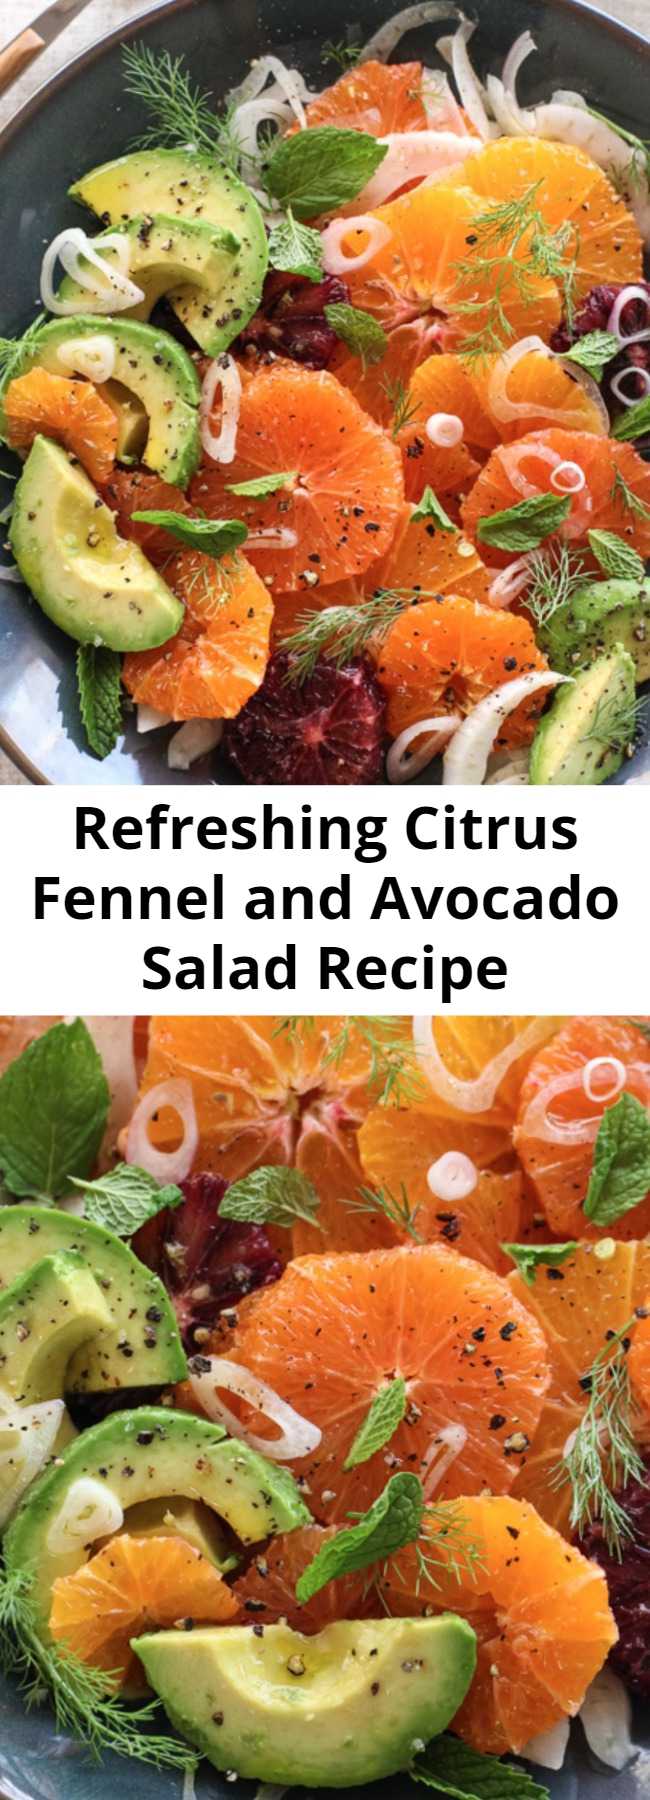 Refreshing Citrus Fennel and Avocado Salad Recipe - Now, I’ve made renditions of this recipe plenty of times in the past, but never with this many different styles of antioxidant-filled, Vitamin C-packed, oranges.